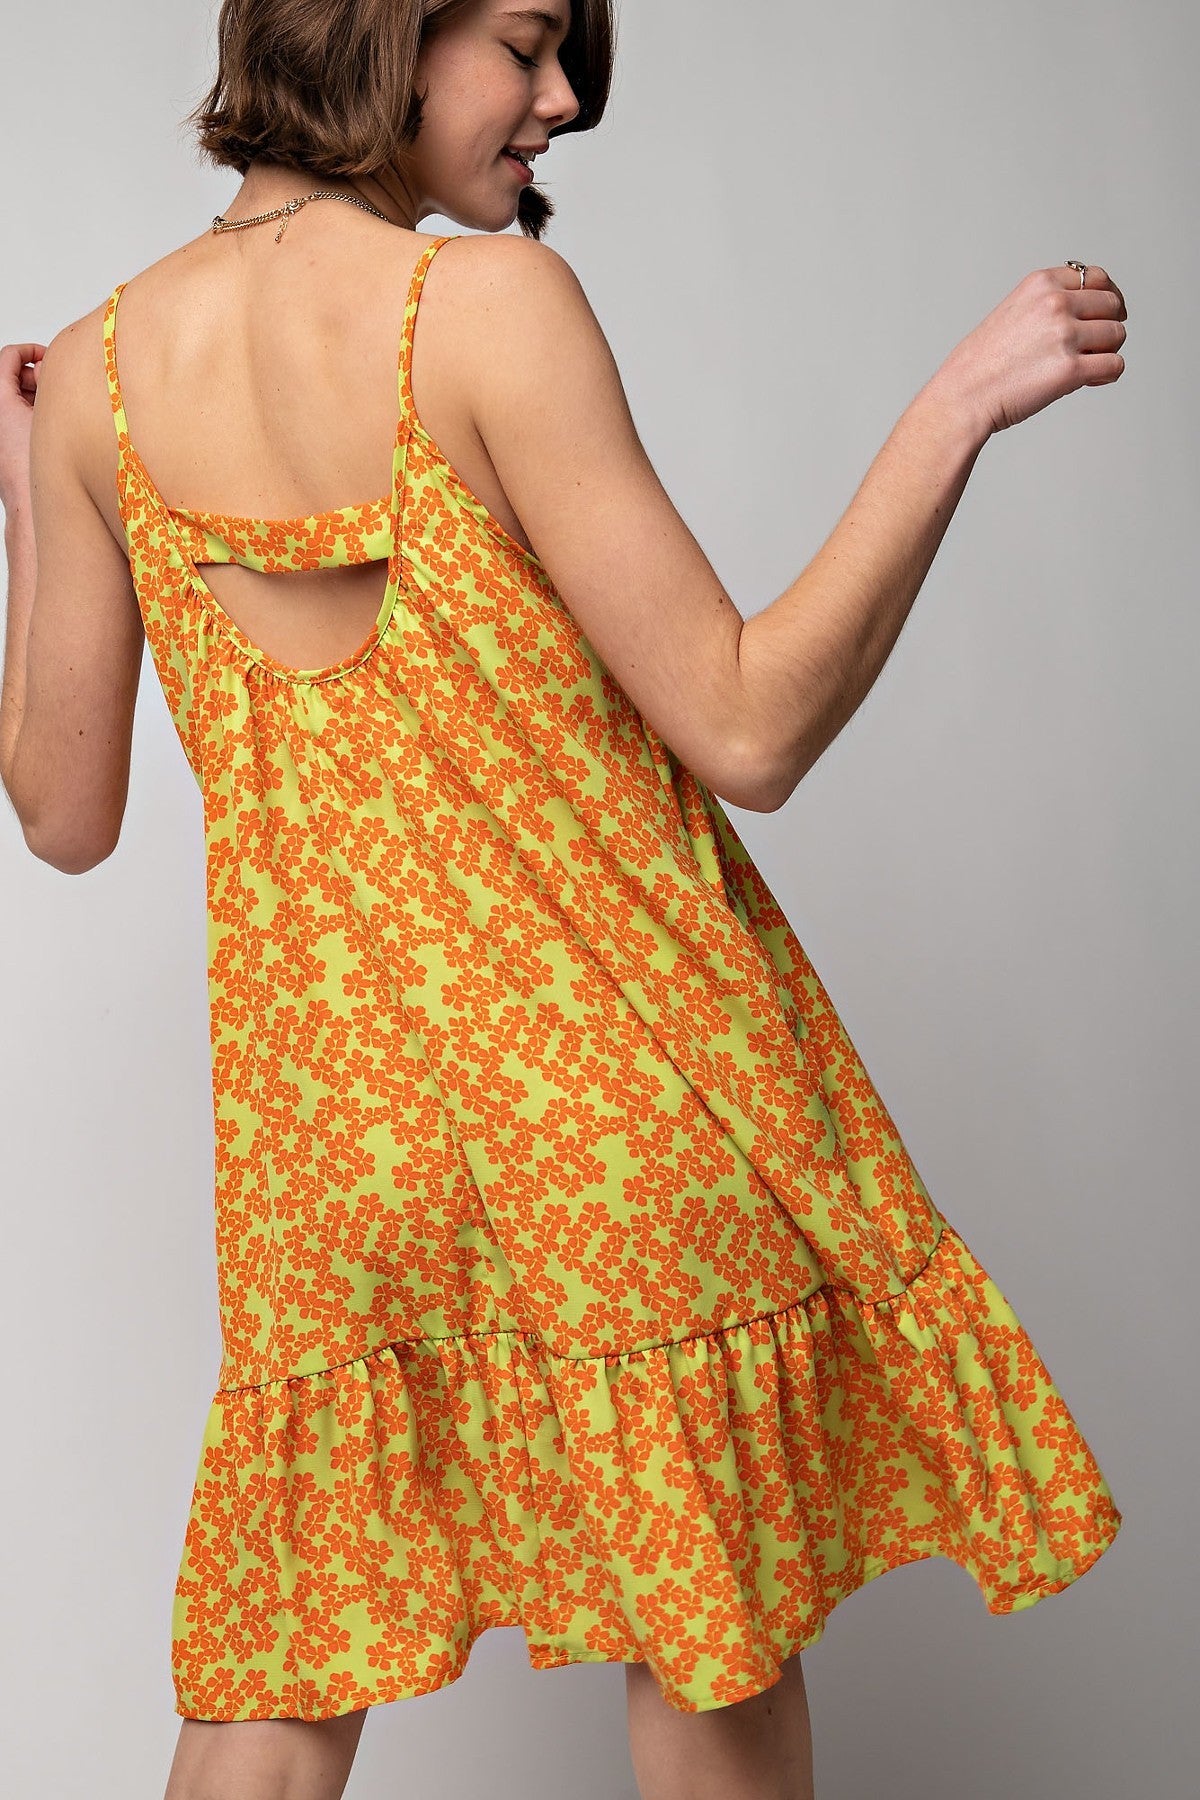 Sunny Lime Ruffled with Scoop Neckline and Spaghetti Straps Dress